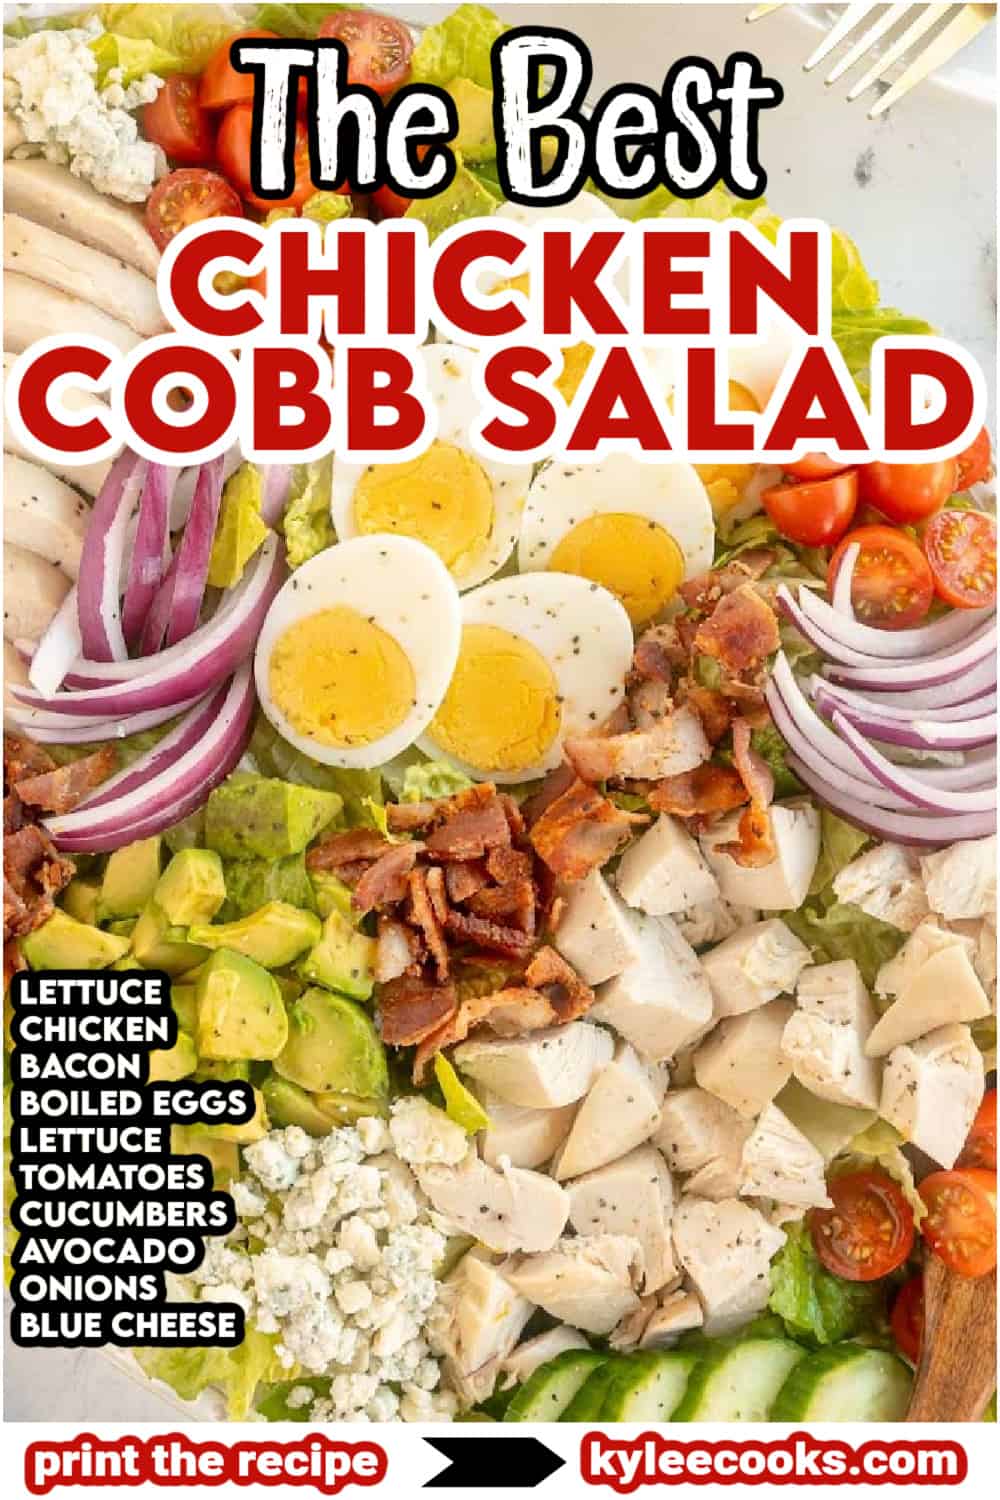 chicken cobb salad on a plate with recipe name and ingredients overlaid in text.